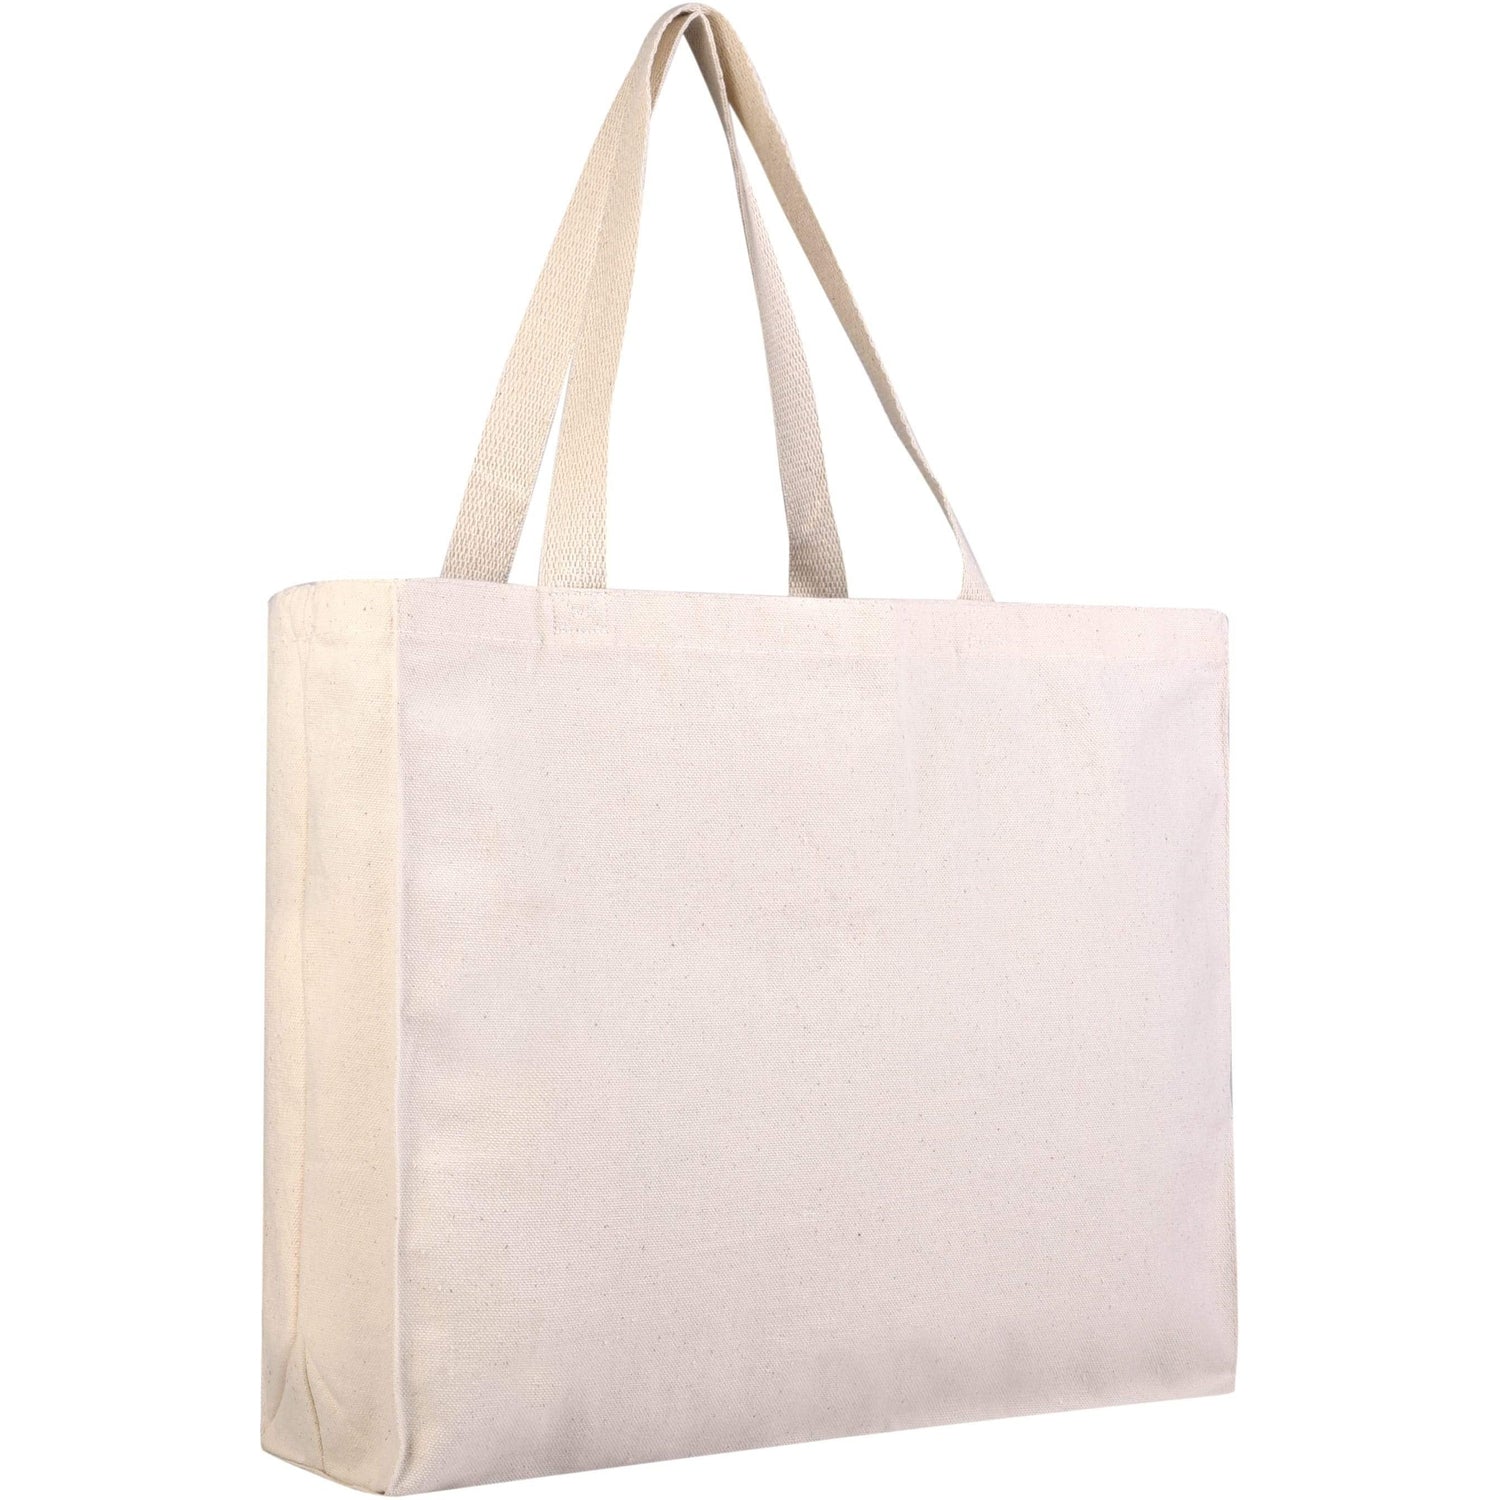 tote bag with wheels canvas